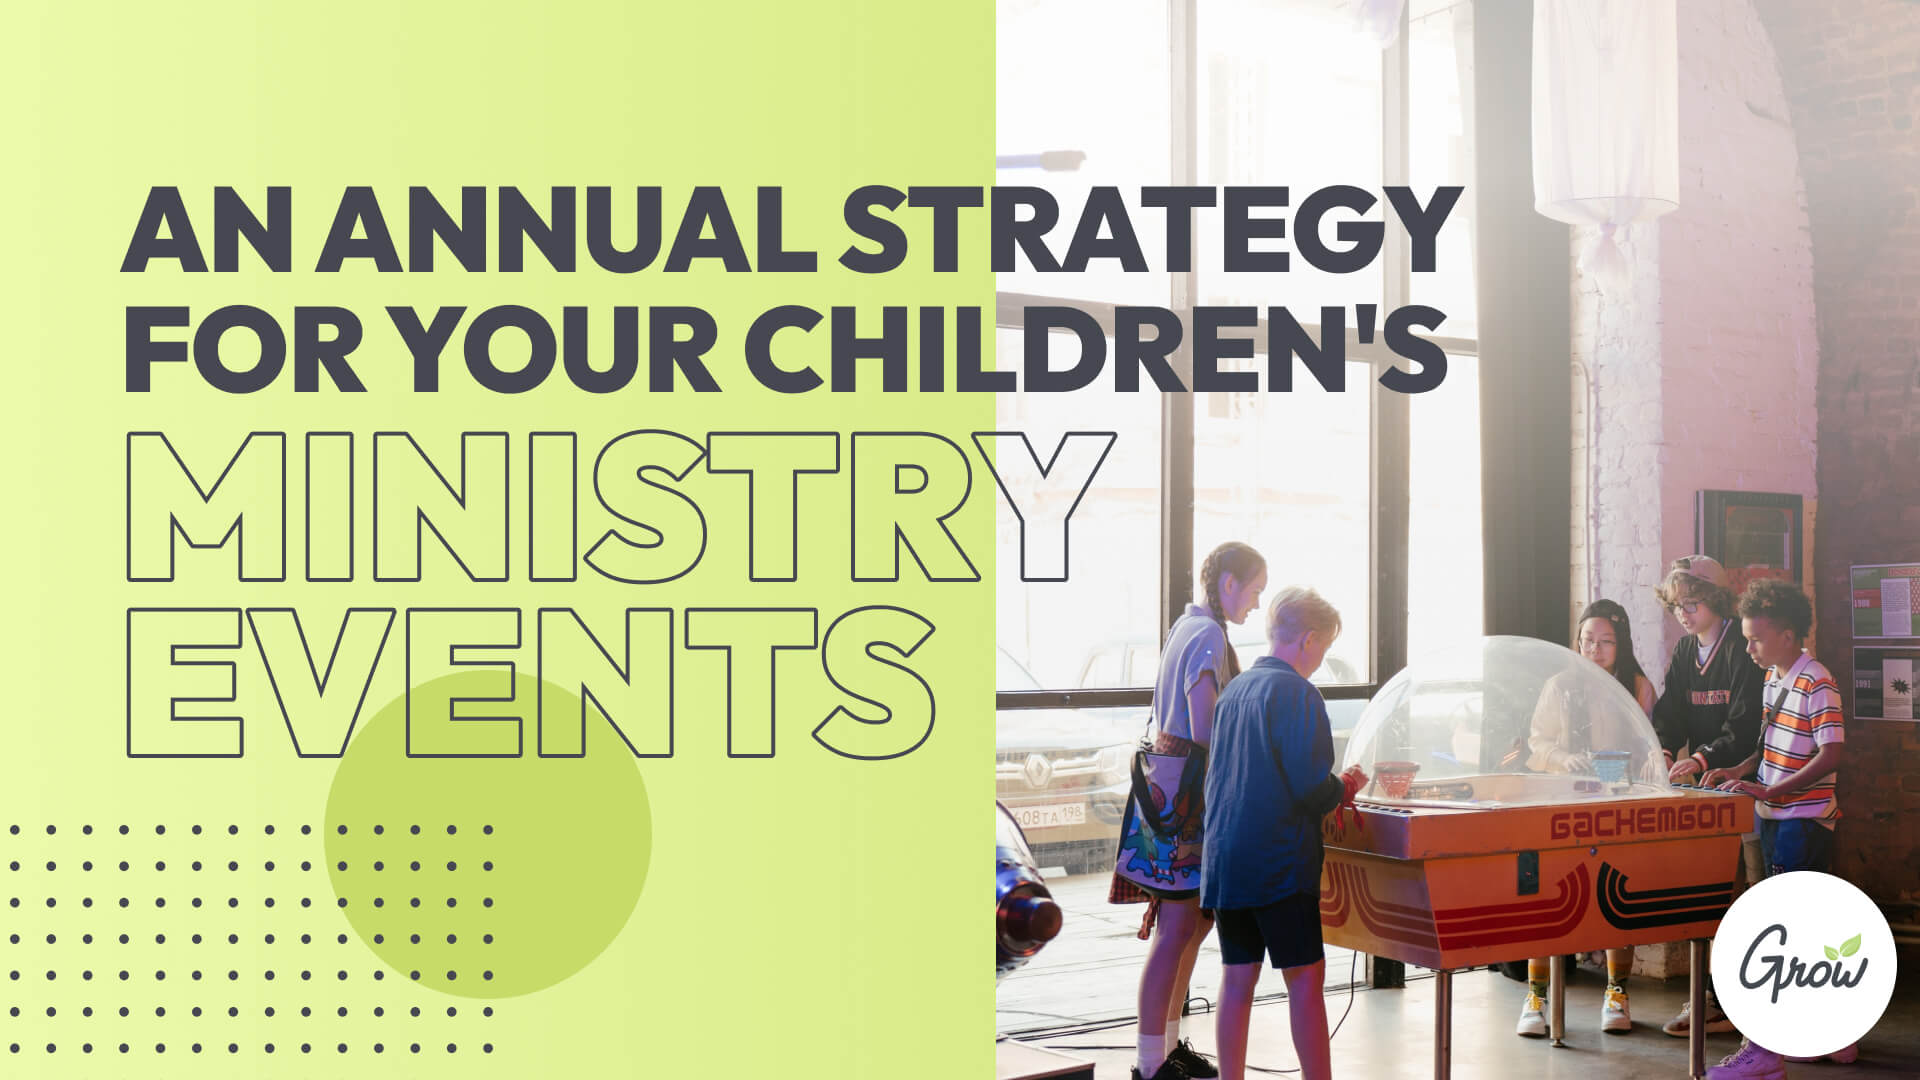 An Annual Strategy for Your Children's Ministry Events